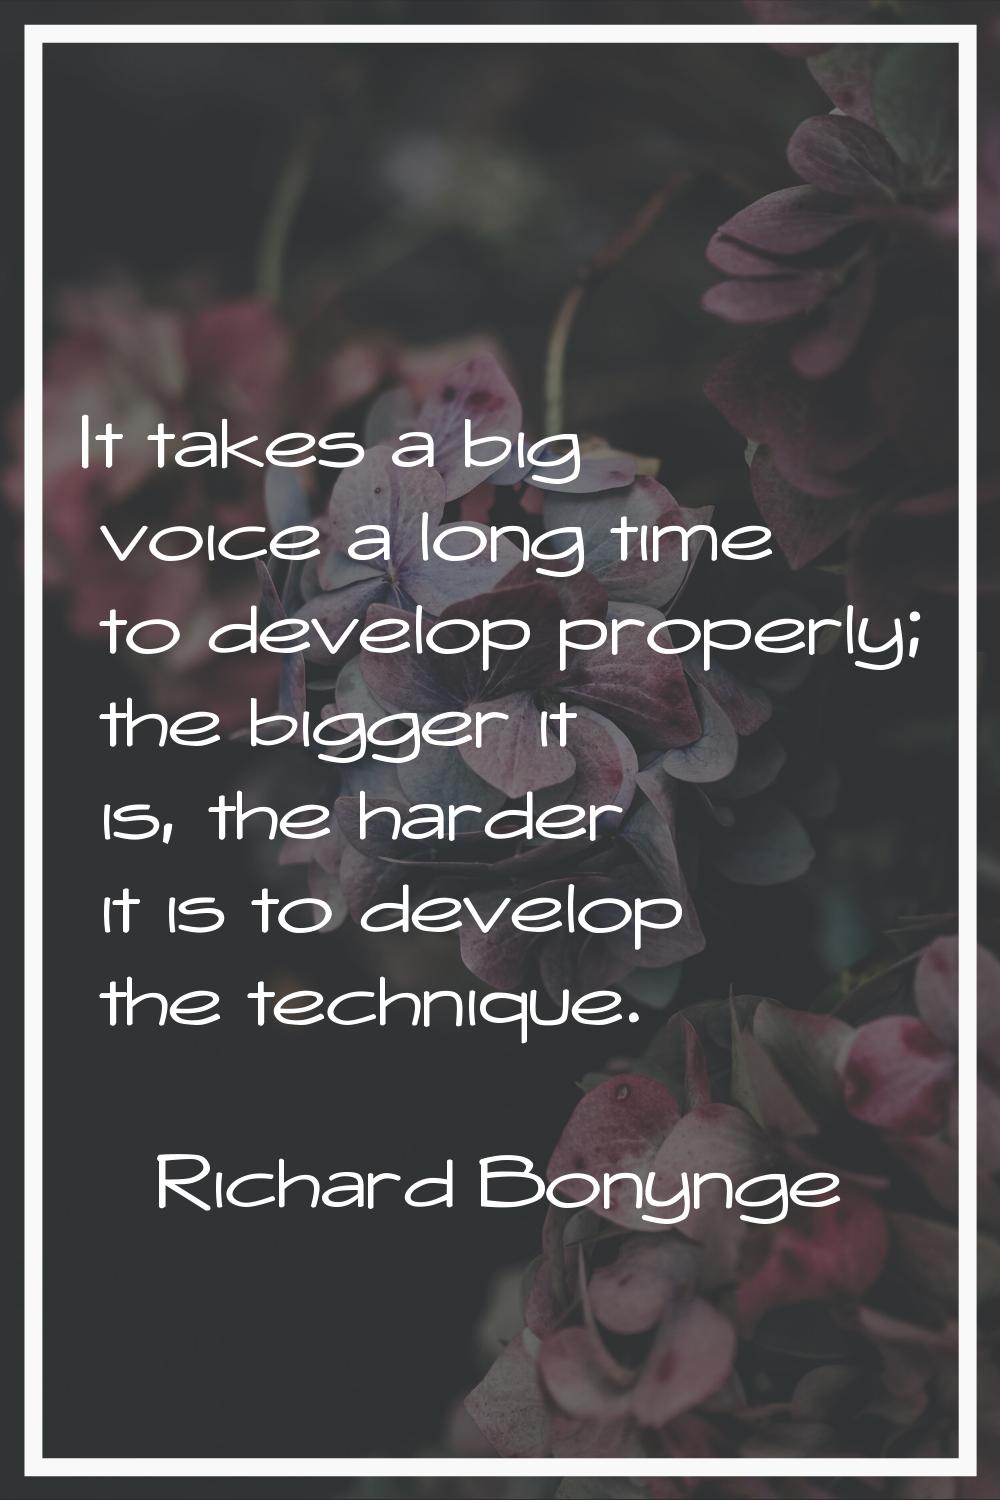 It takes a big voice a long time to develop properly; the bigger it is, the harder it is to develop